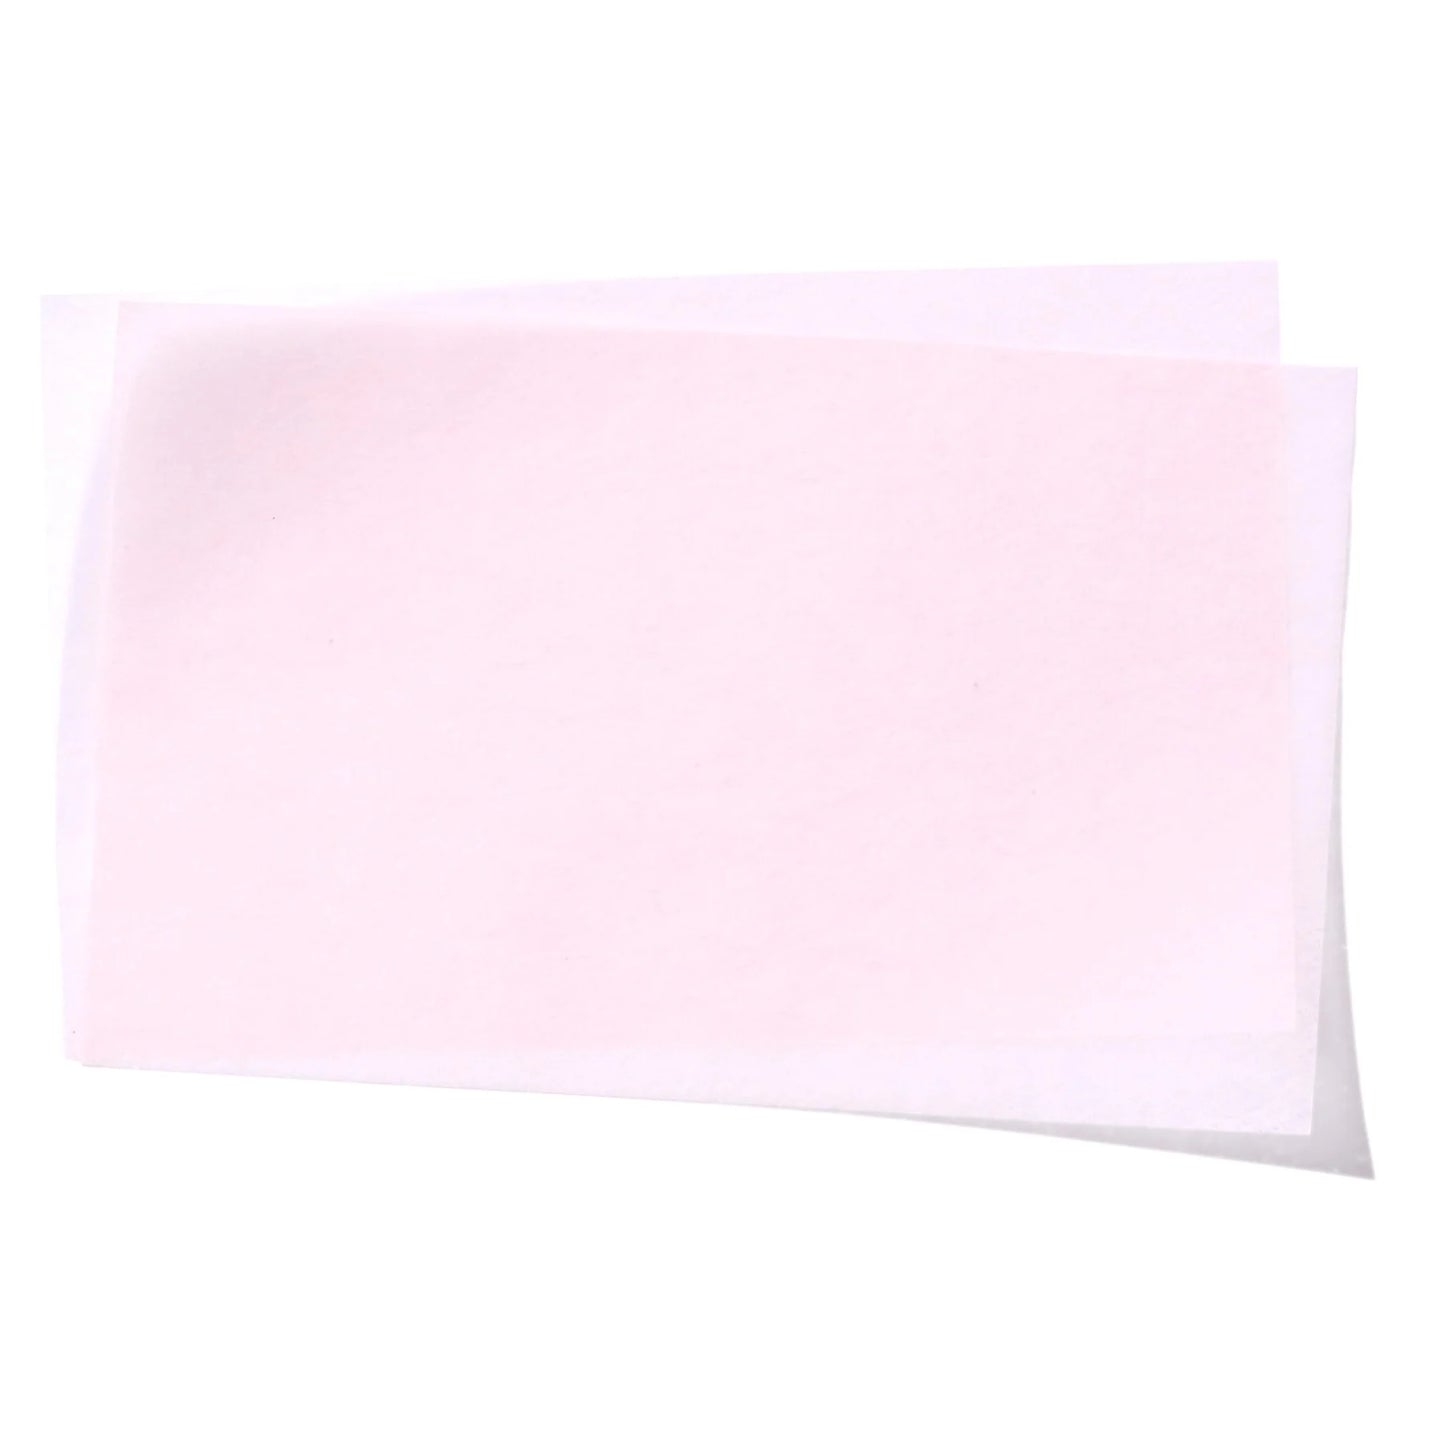 Beauty Creations Oily Who? - Pink Blotting Paper 3pc Bundle